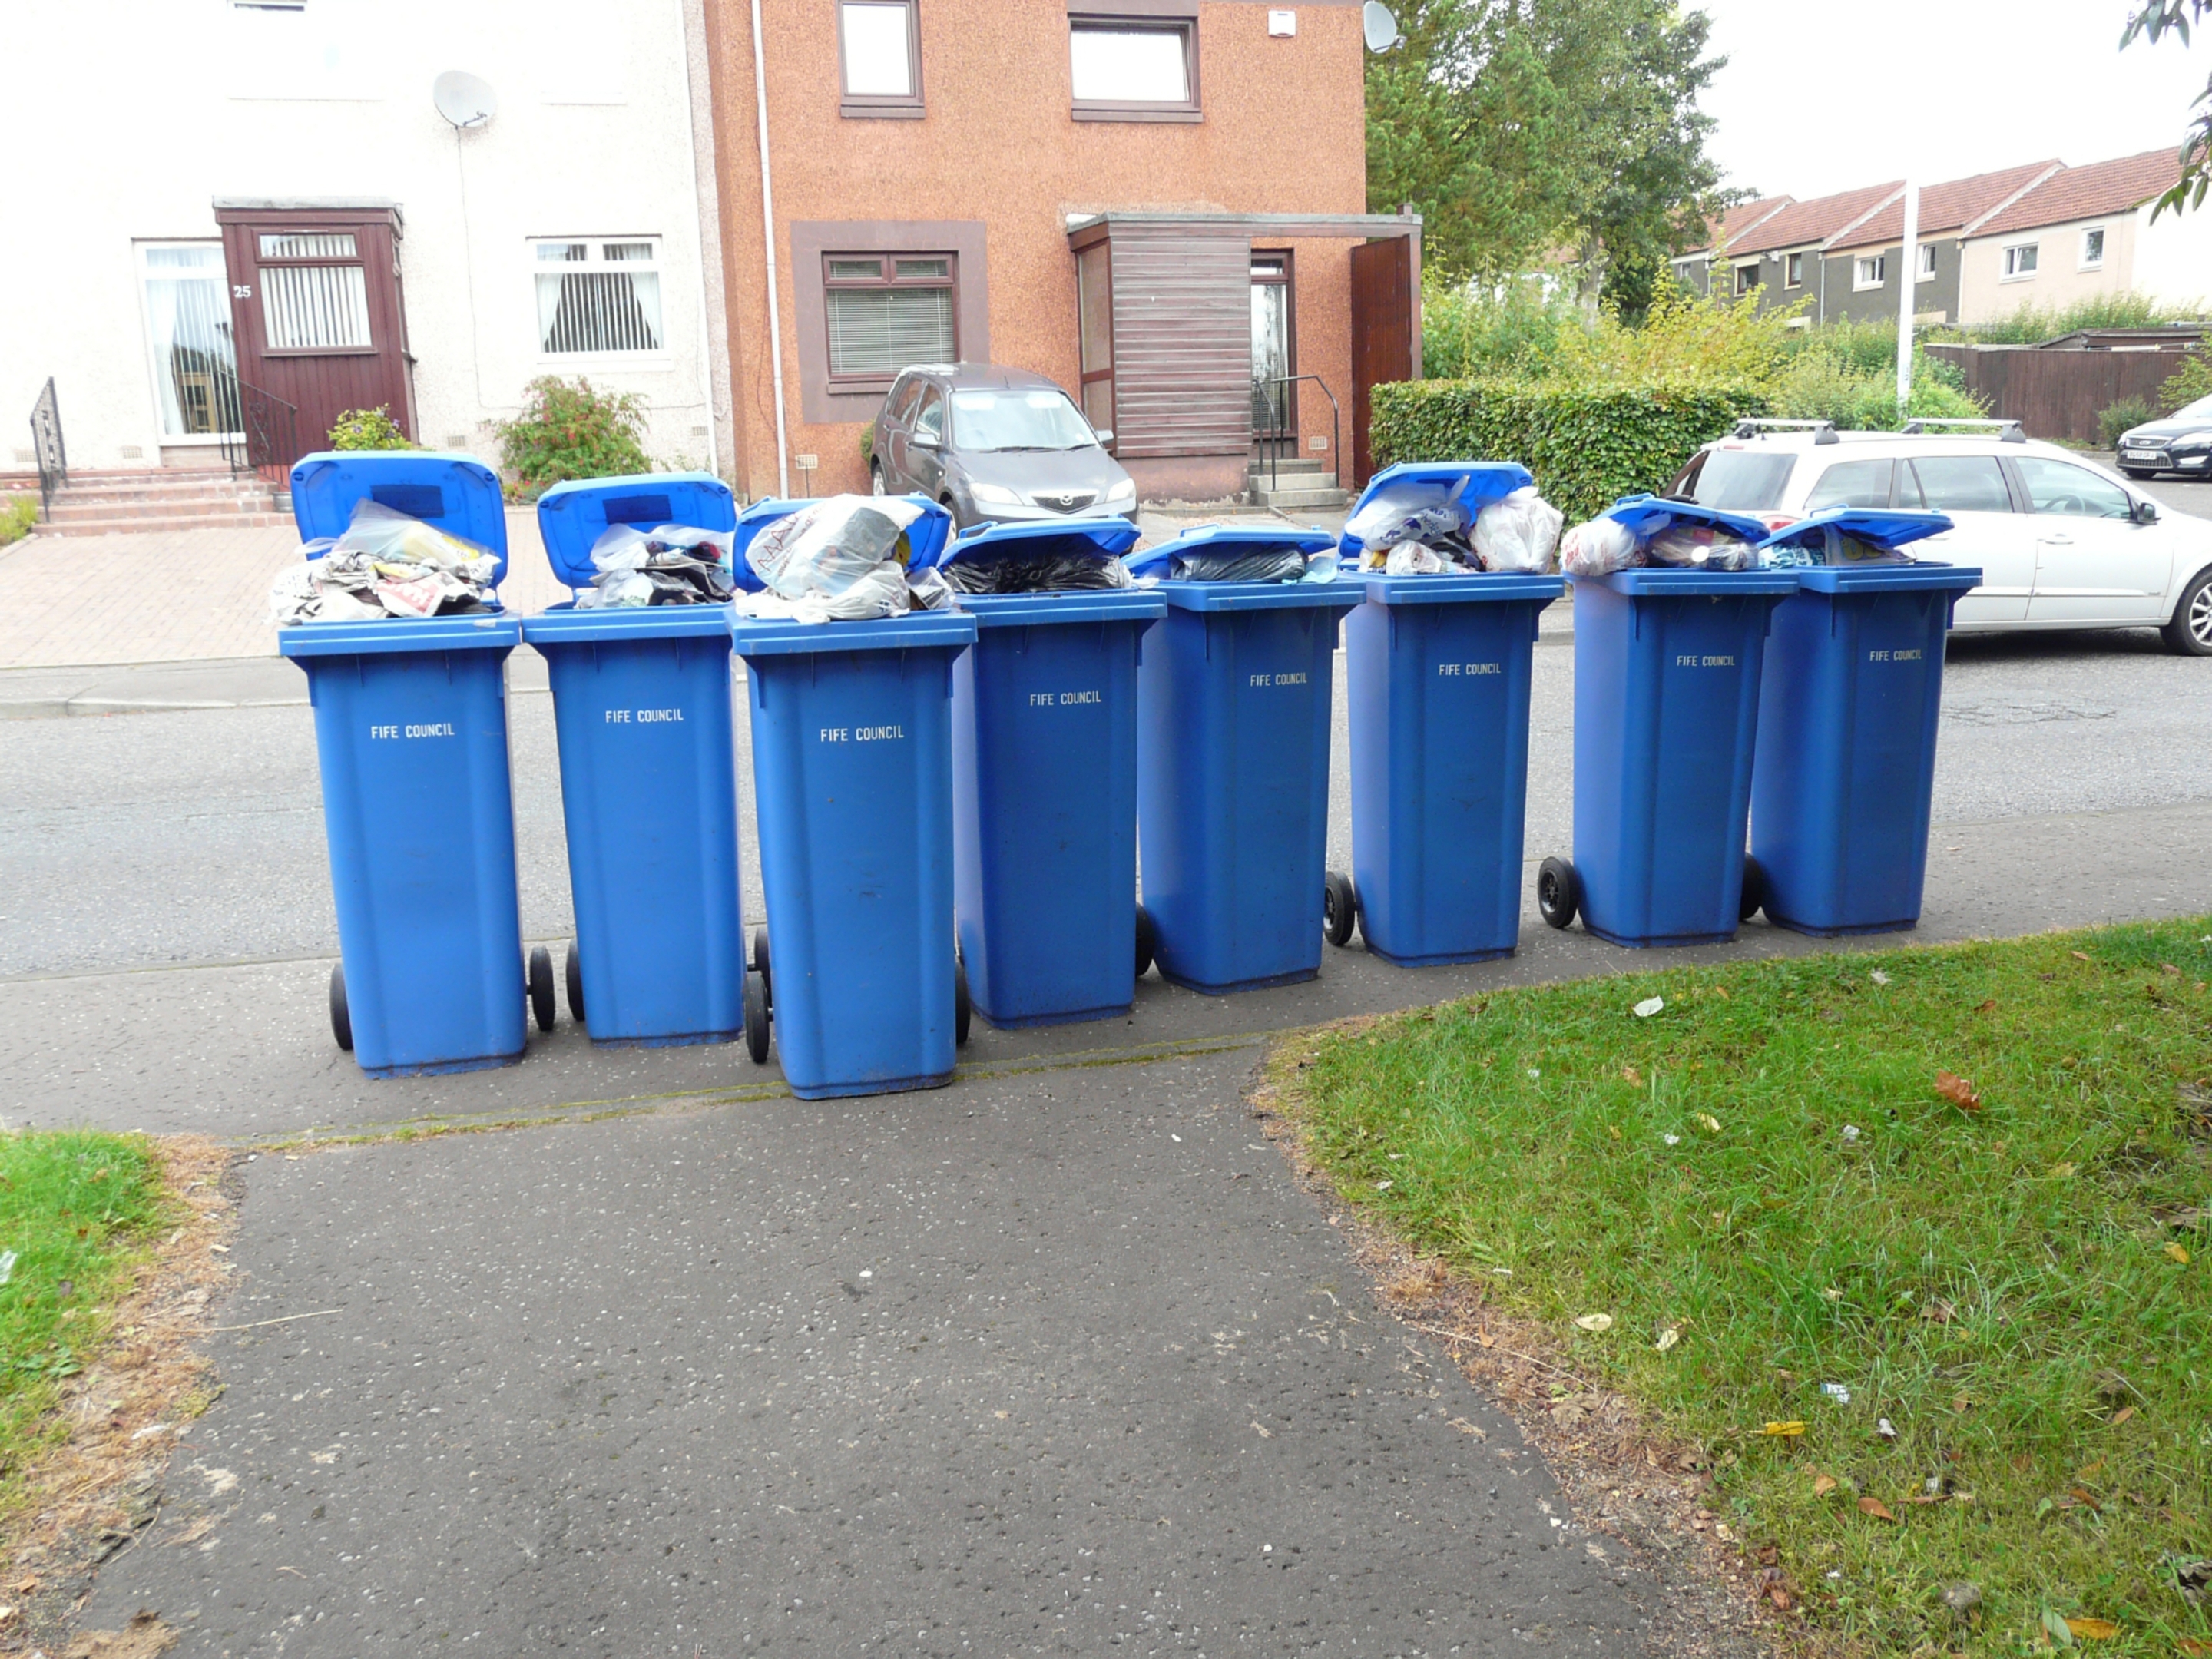 Mr Cookson says that current landfill bins, like these he spotted in Stenton recently, are too small for four-weekly collections